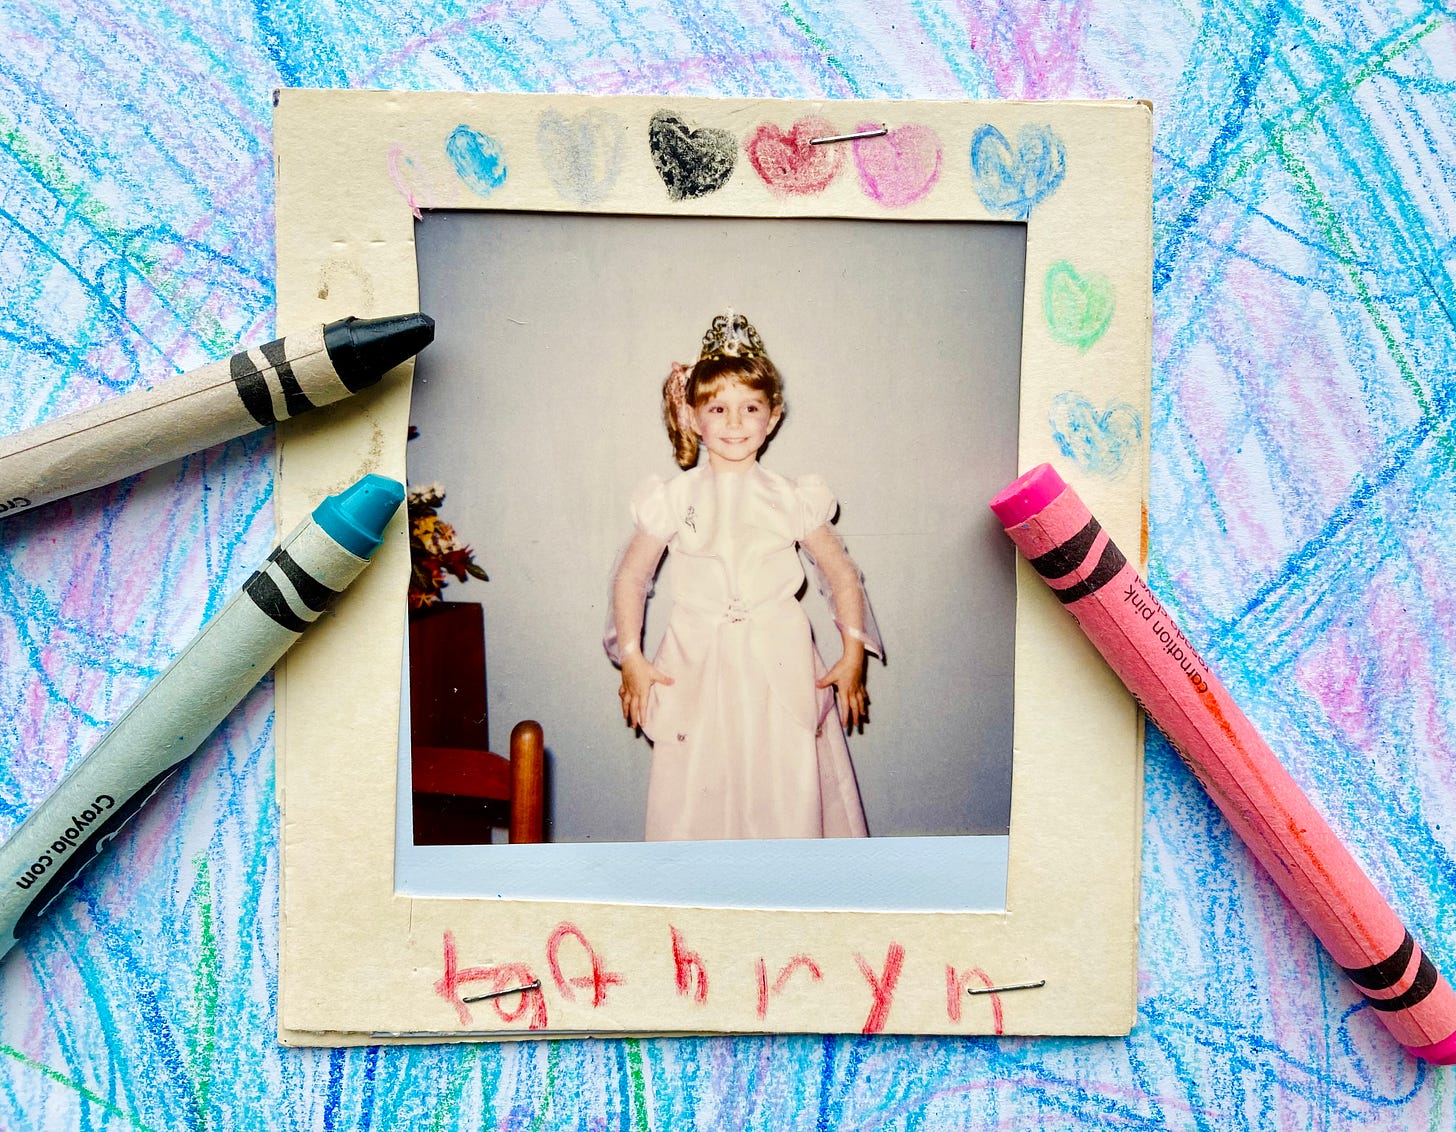 a polaroid photograph of a 4-year-old child in a princess costume. the child is smiling but looks uncomfortable. the photograph is surrounded by a paper frame, on which the child has drawn hearts in crayon and scrawled “kathryn.” the photo rests on a piece of paper covered with crayon marks, and three crayons are arranged around the photo’s edge.